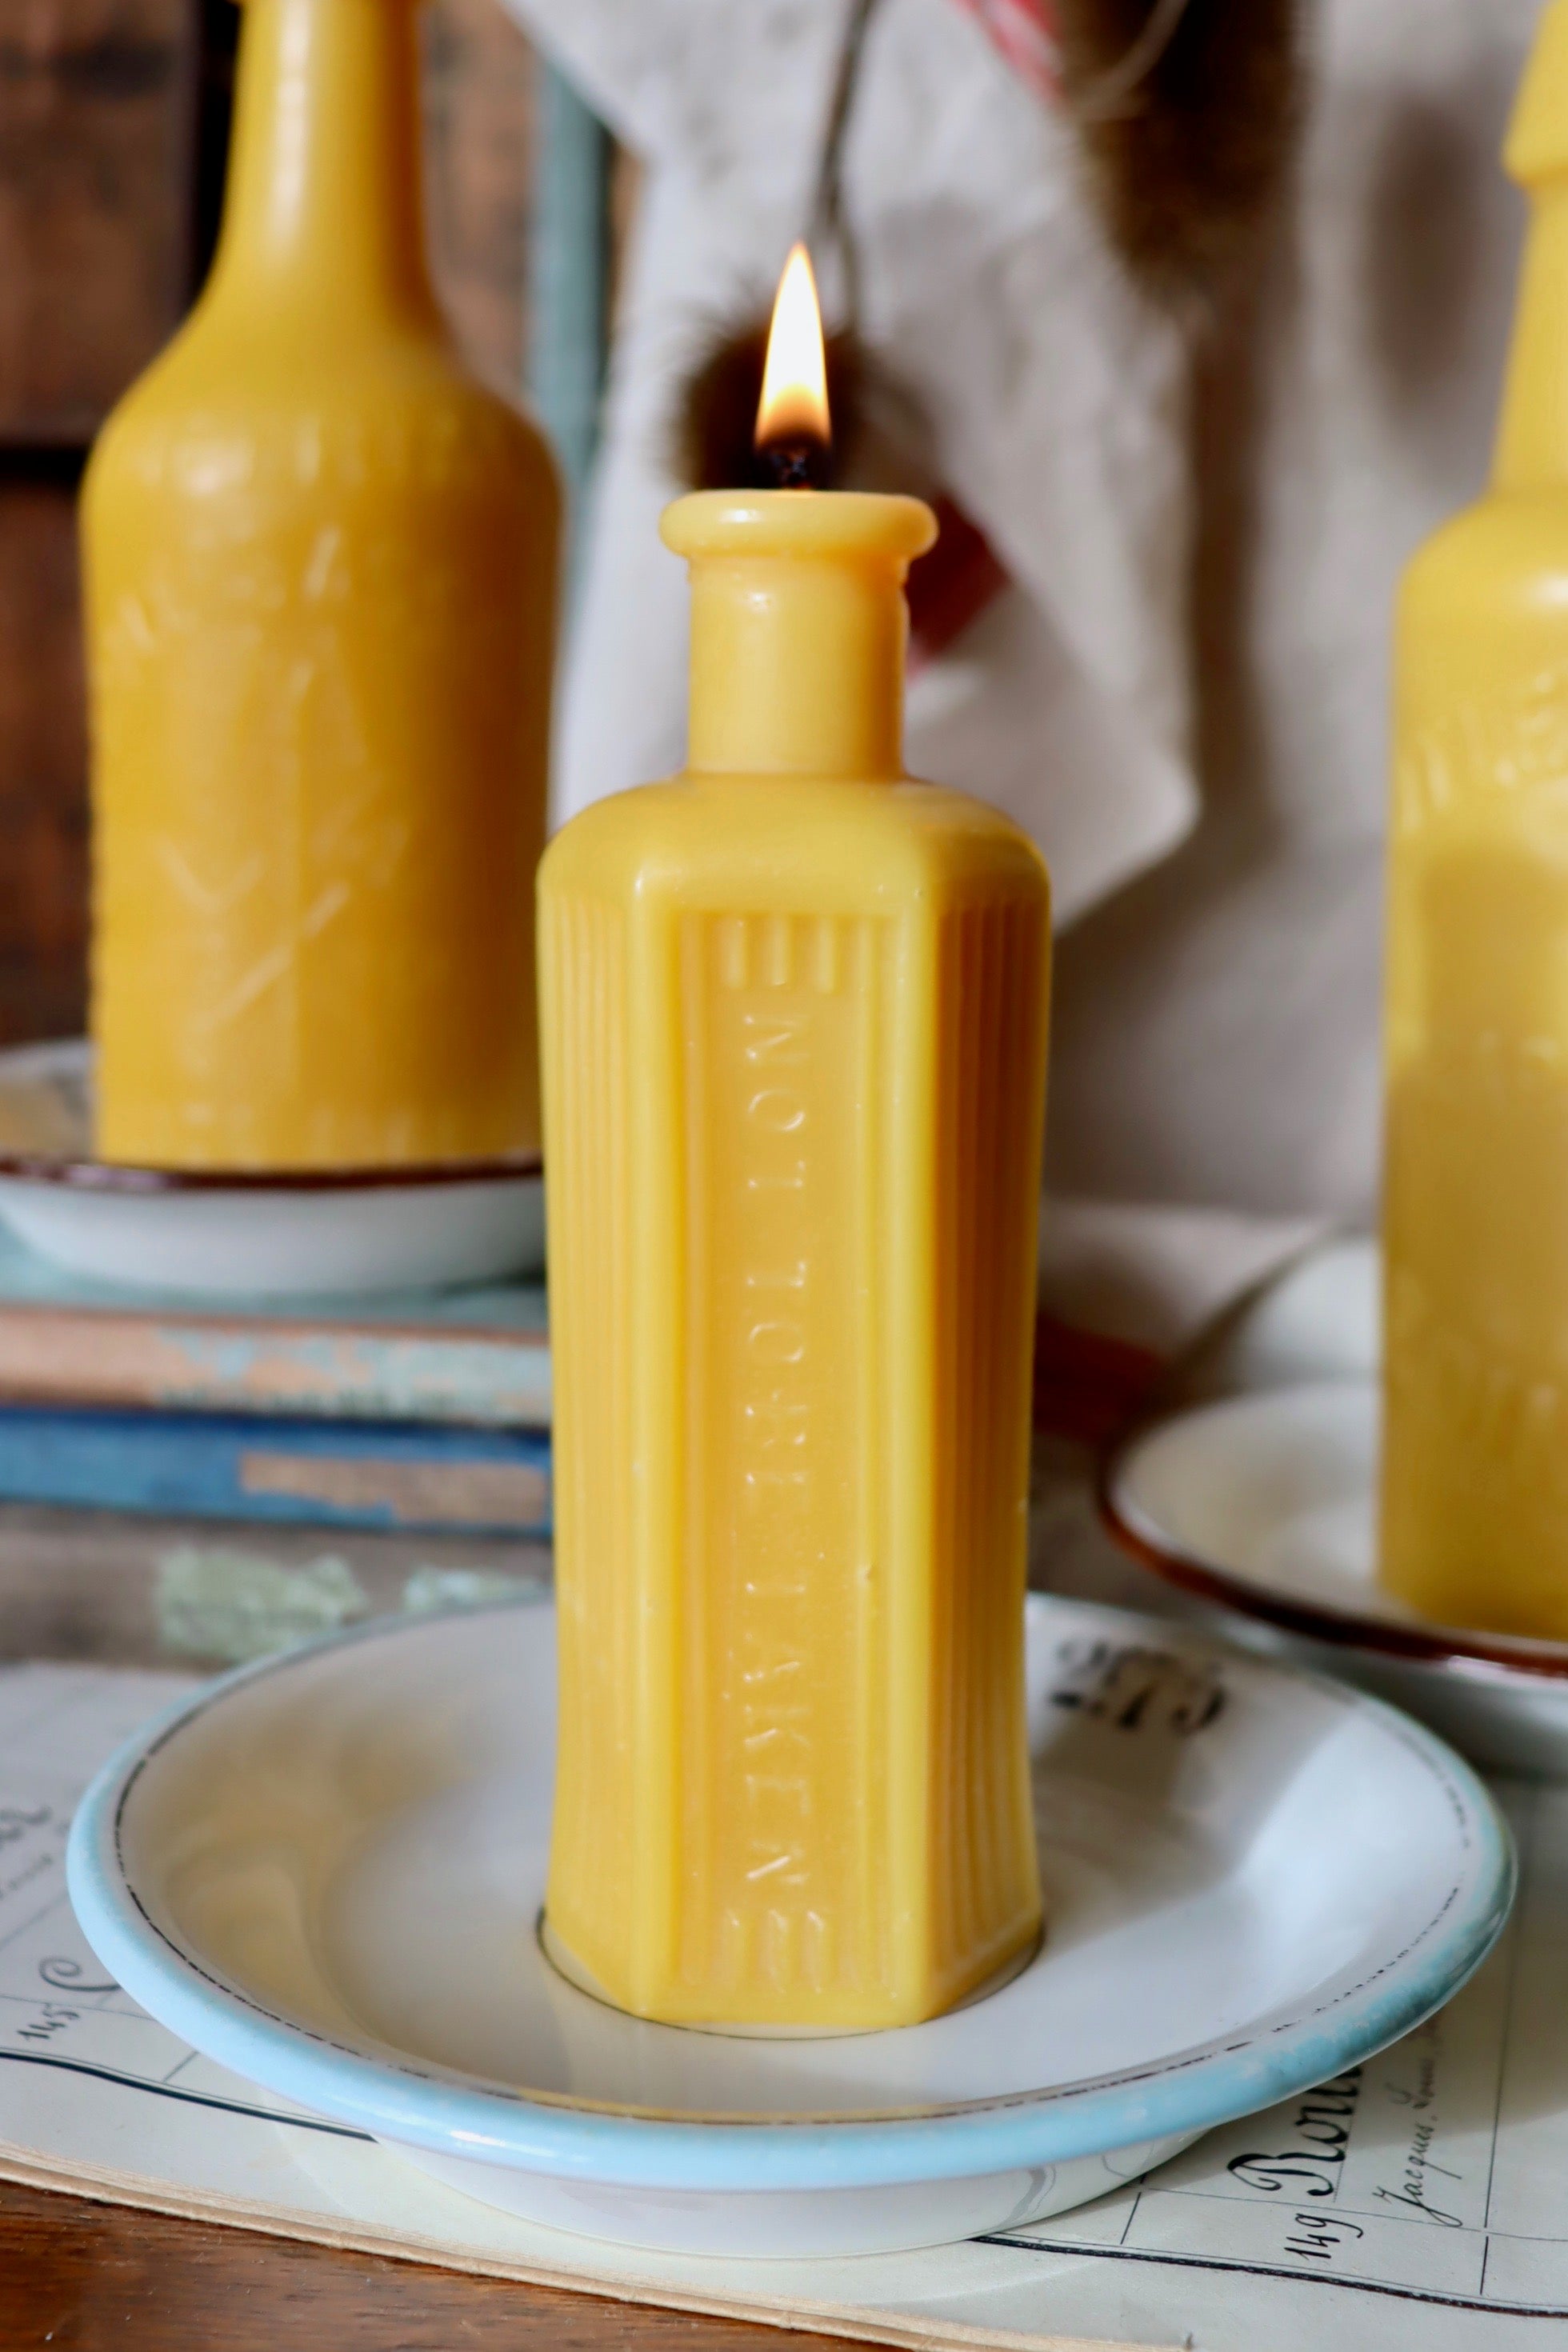 Askews Candles - Poison Bottle Beeswax Candle